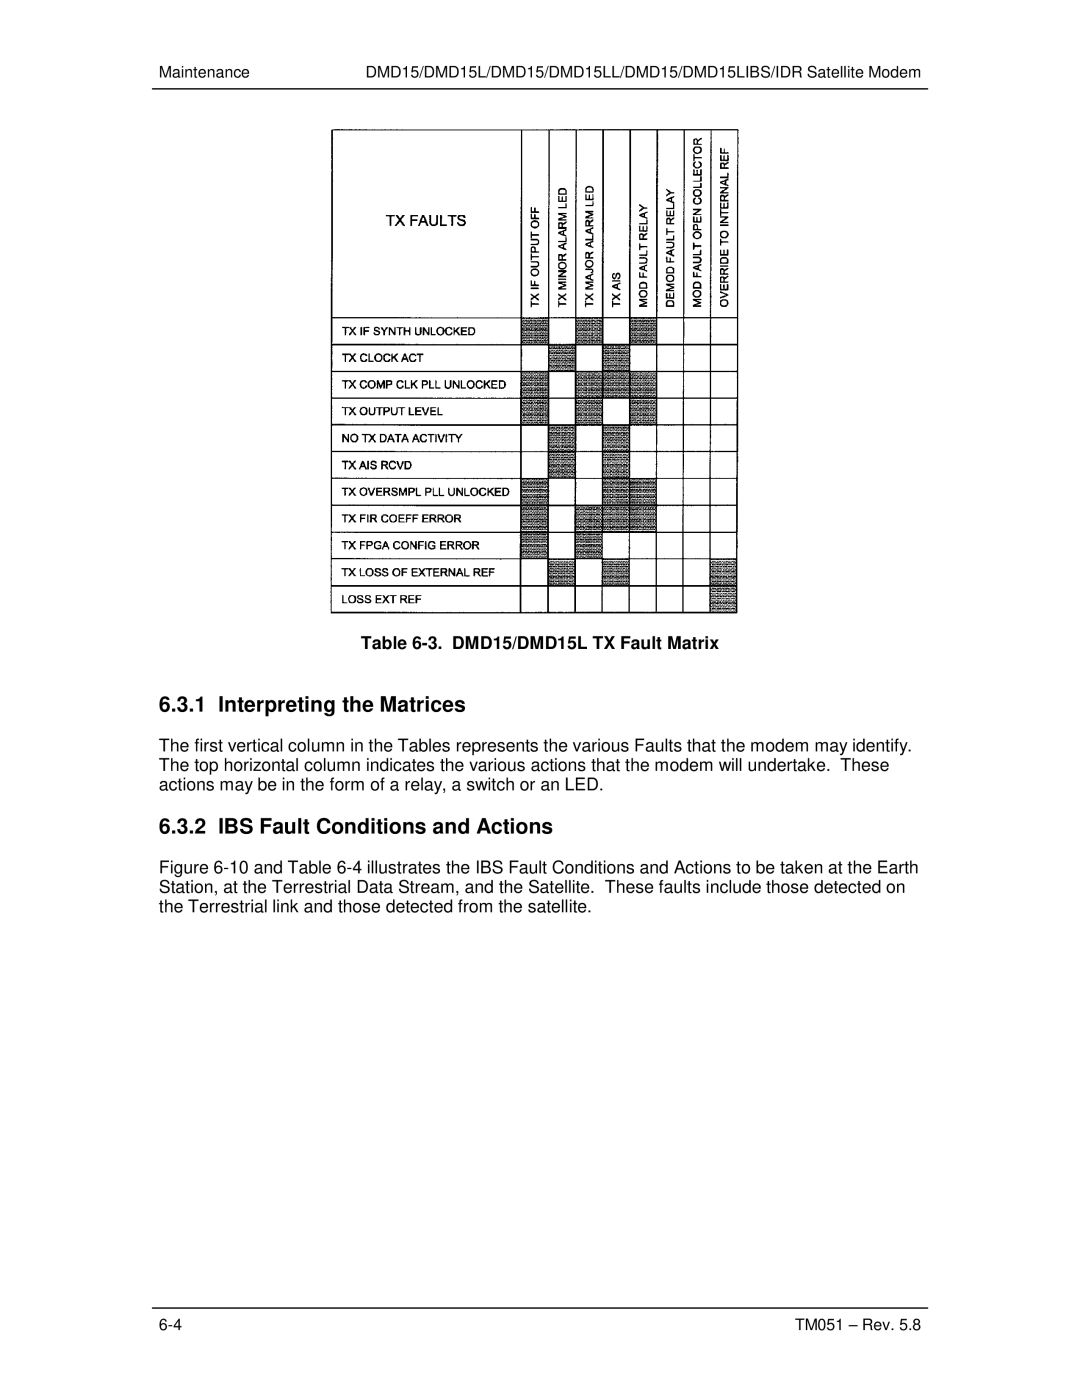 Paradyne operation manual Interpreting the Matrices, IBS Fault Conditions and Actions, DMD15/DMD15L TX Fault Matrix 